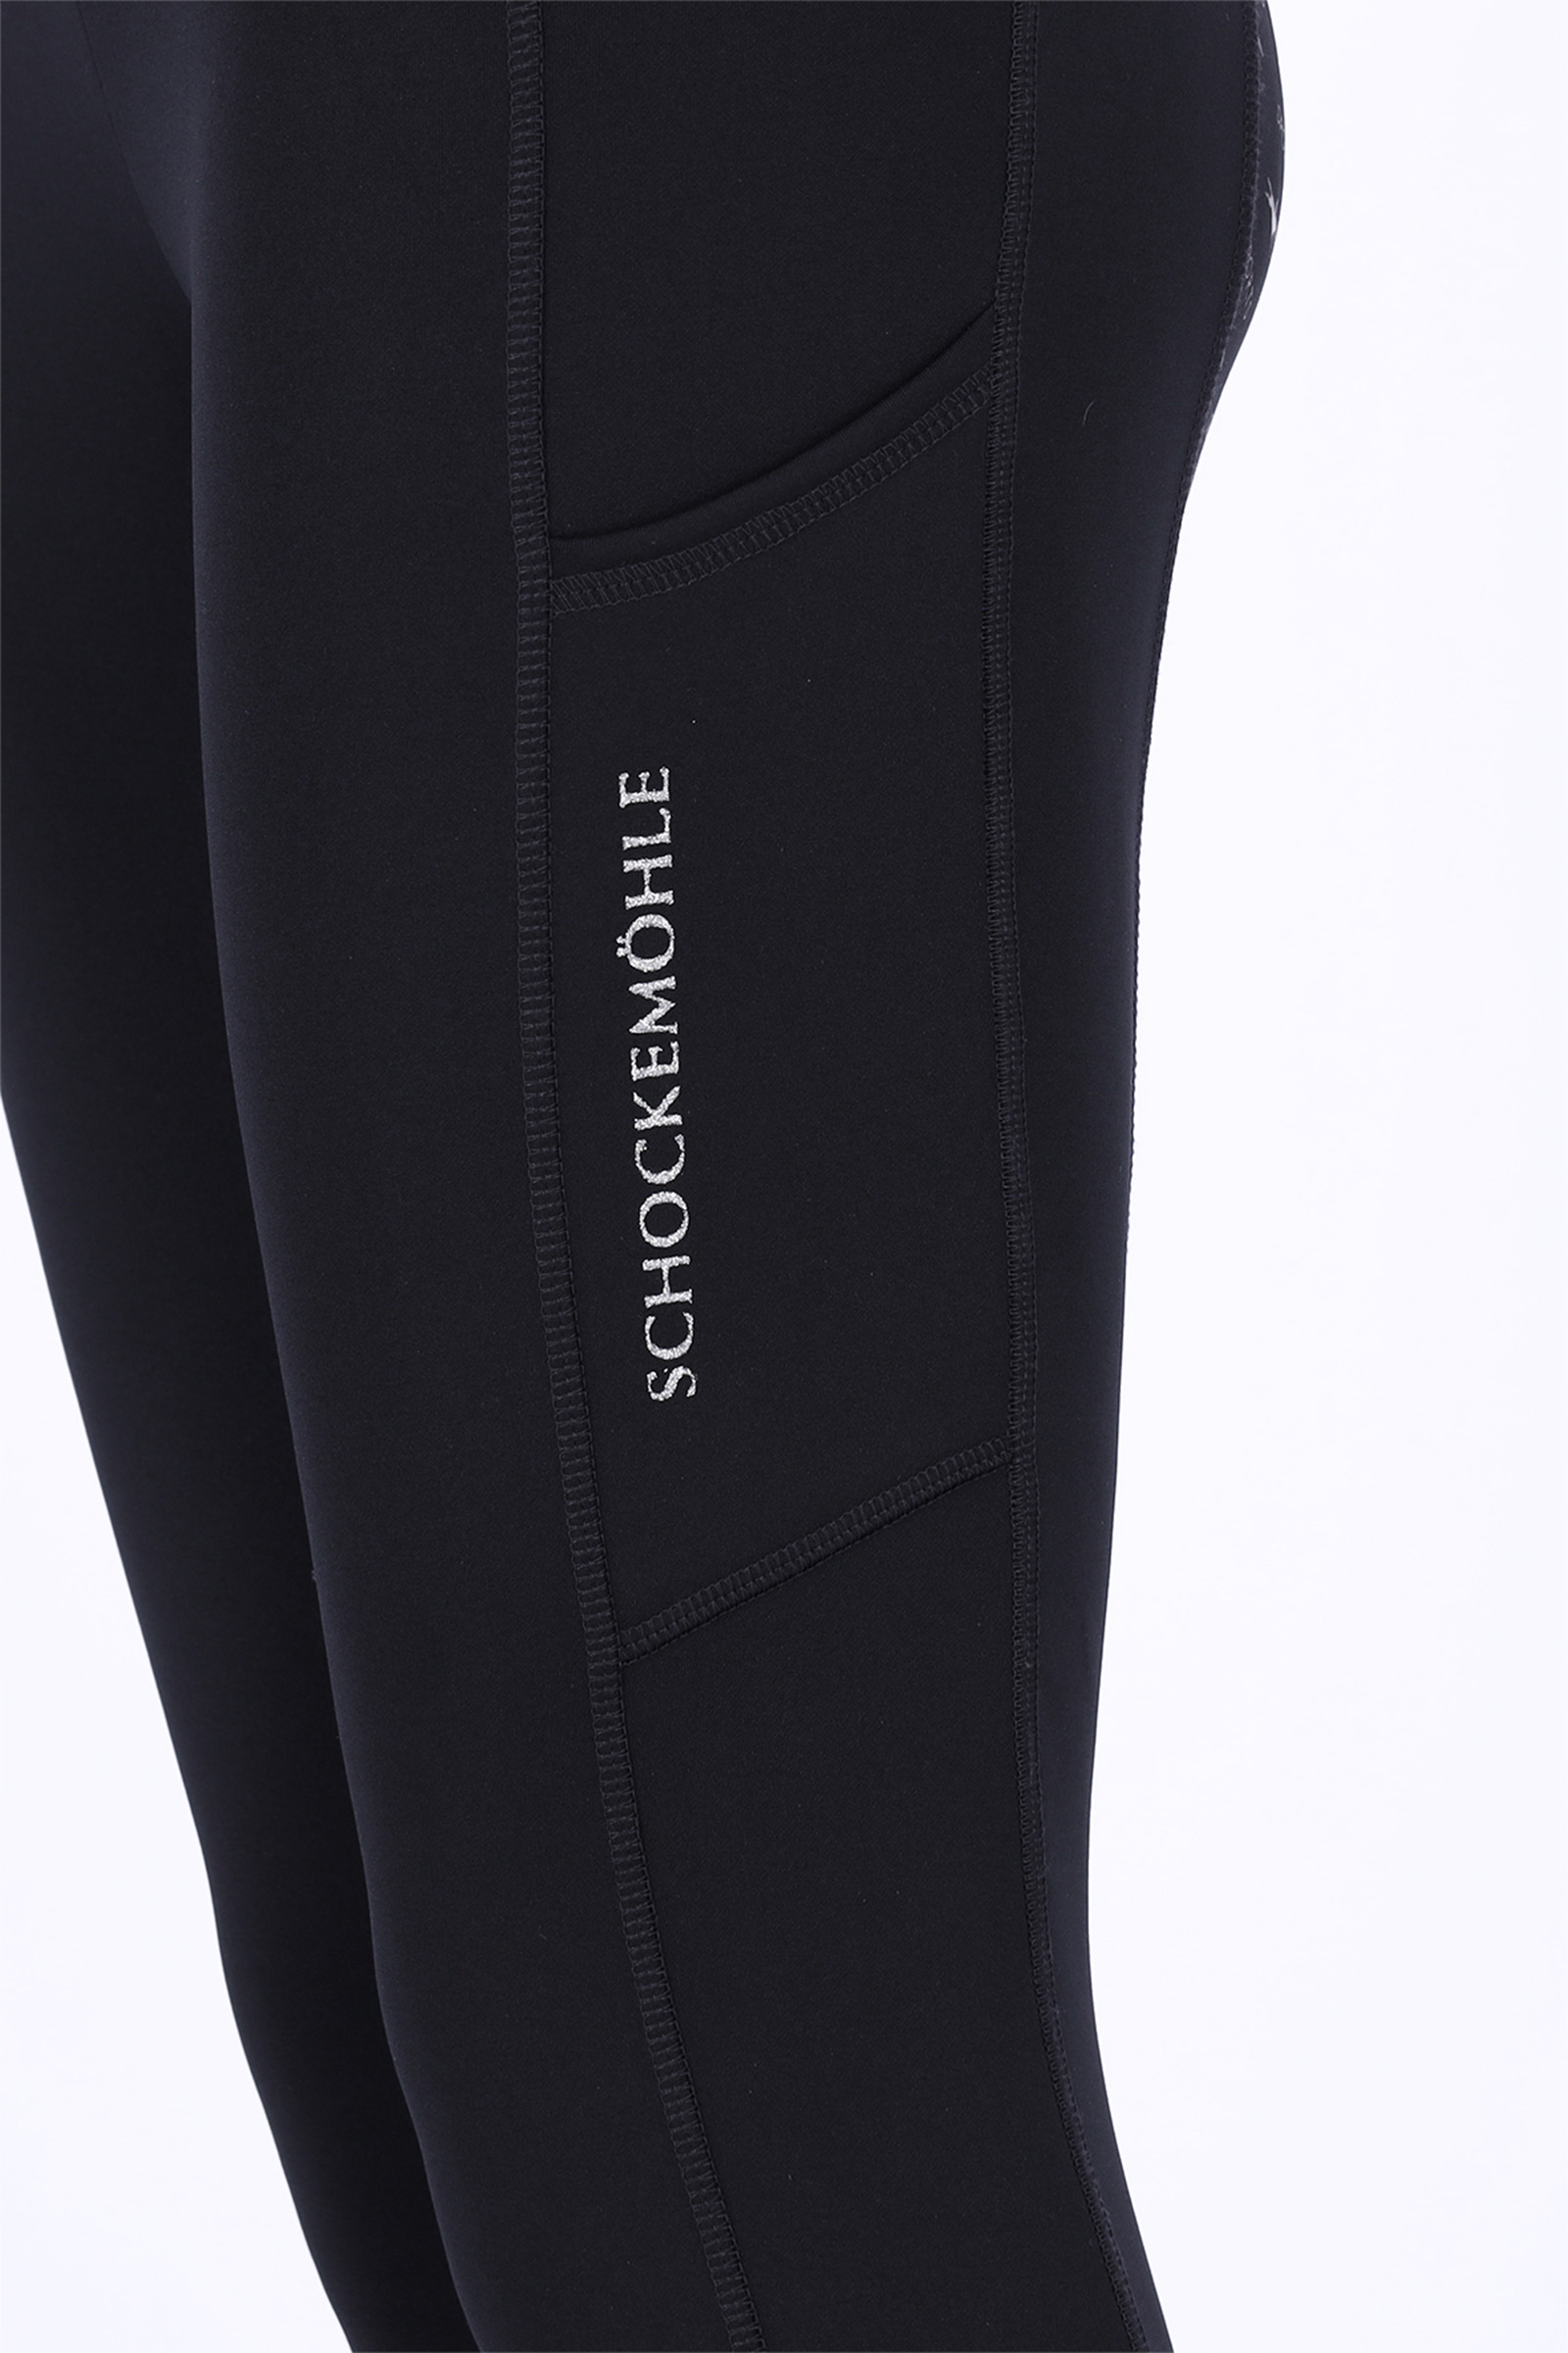 Schockemohle Pocket Riding Tights KP - The Show Trunk II